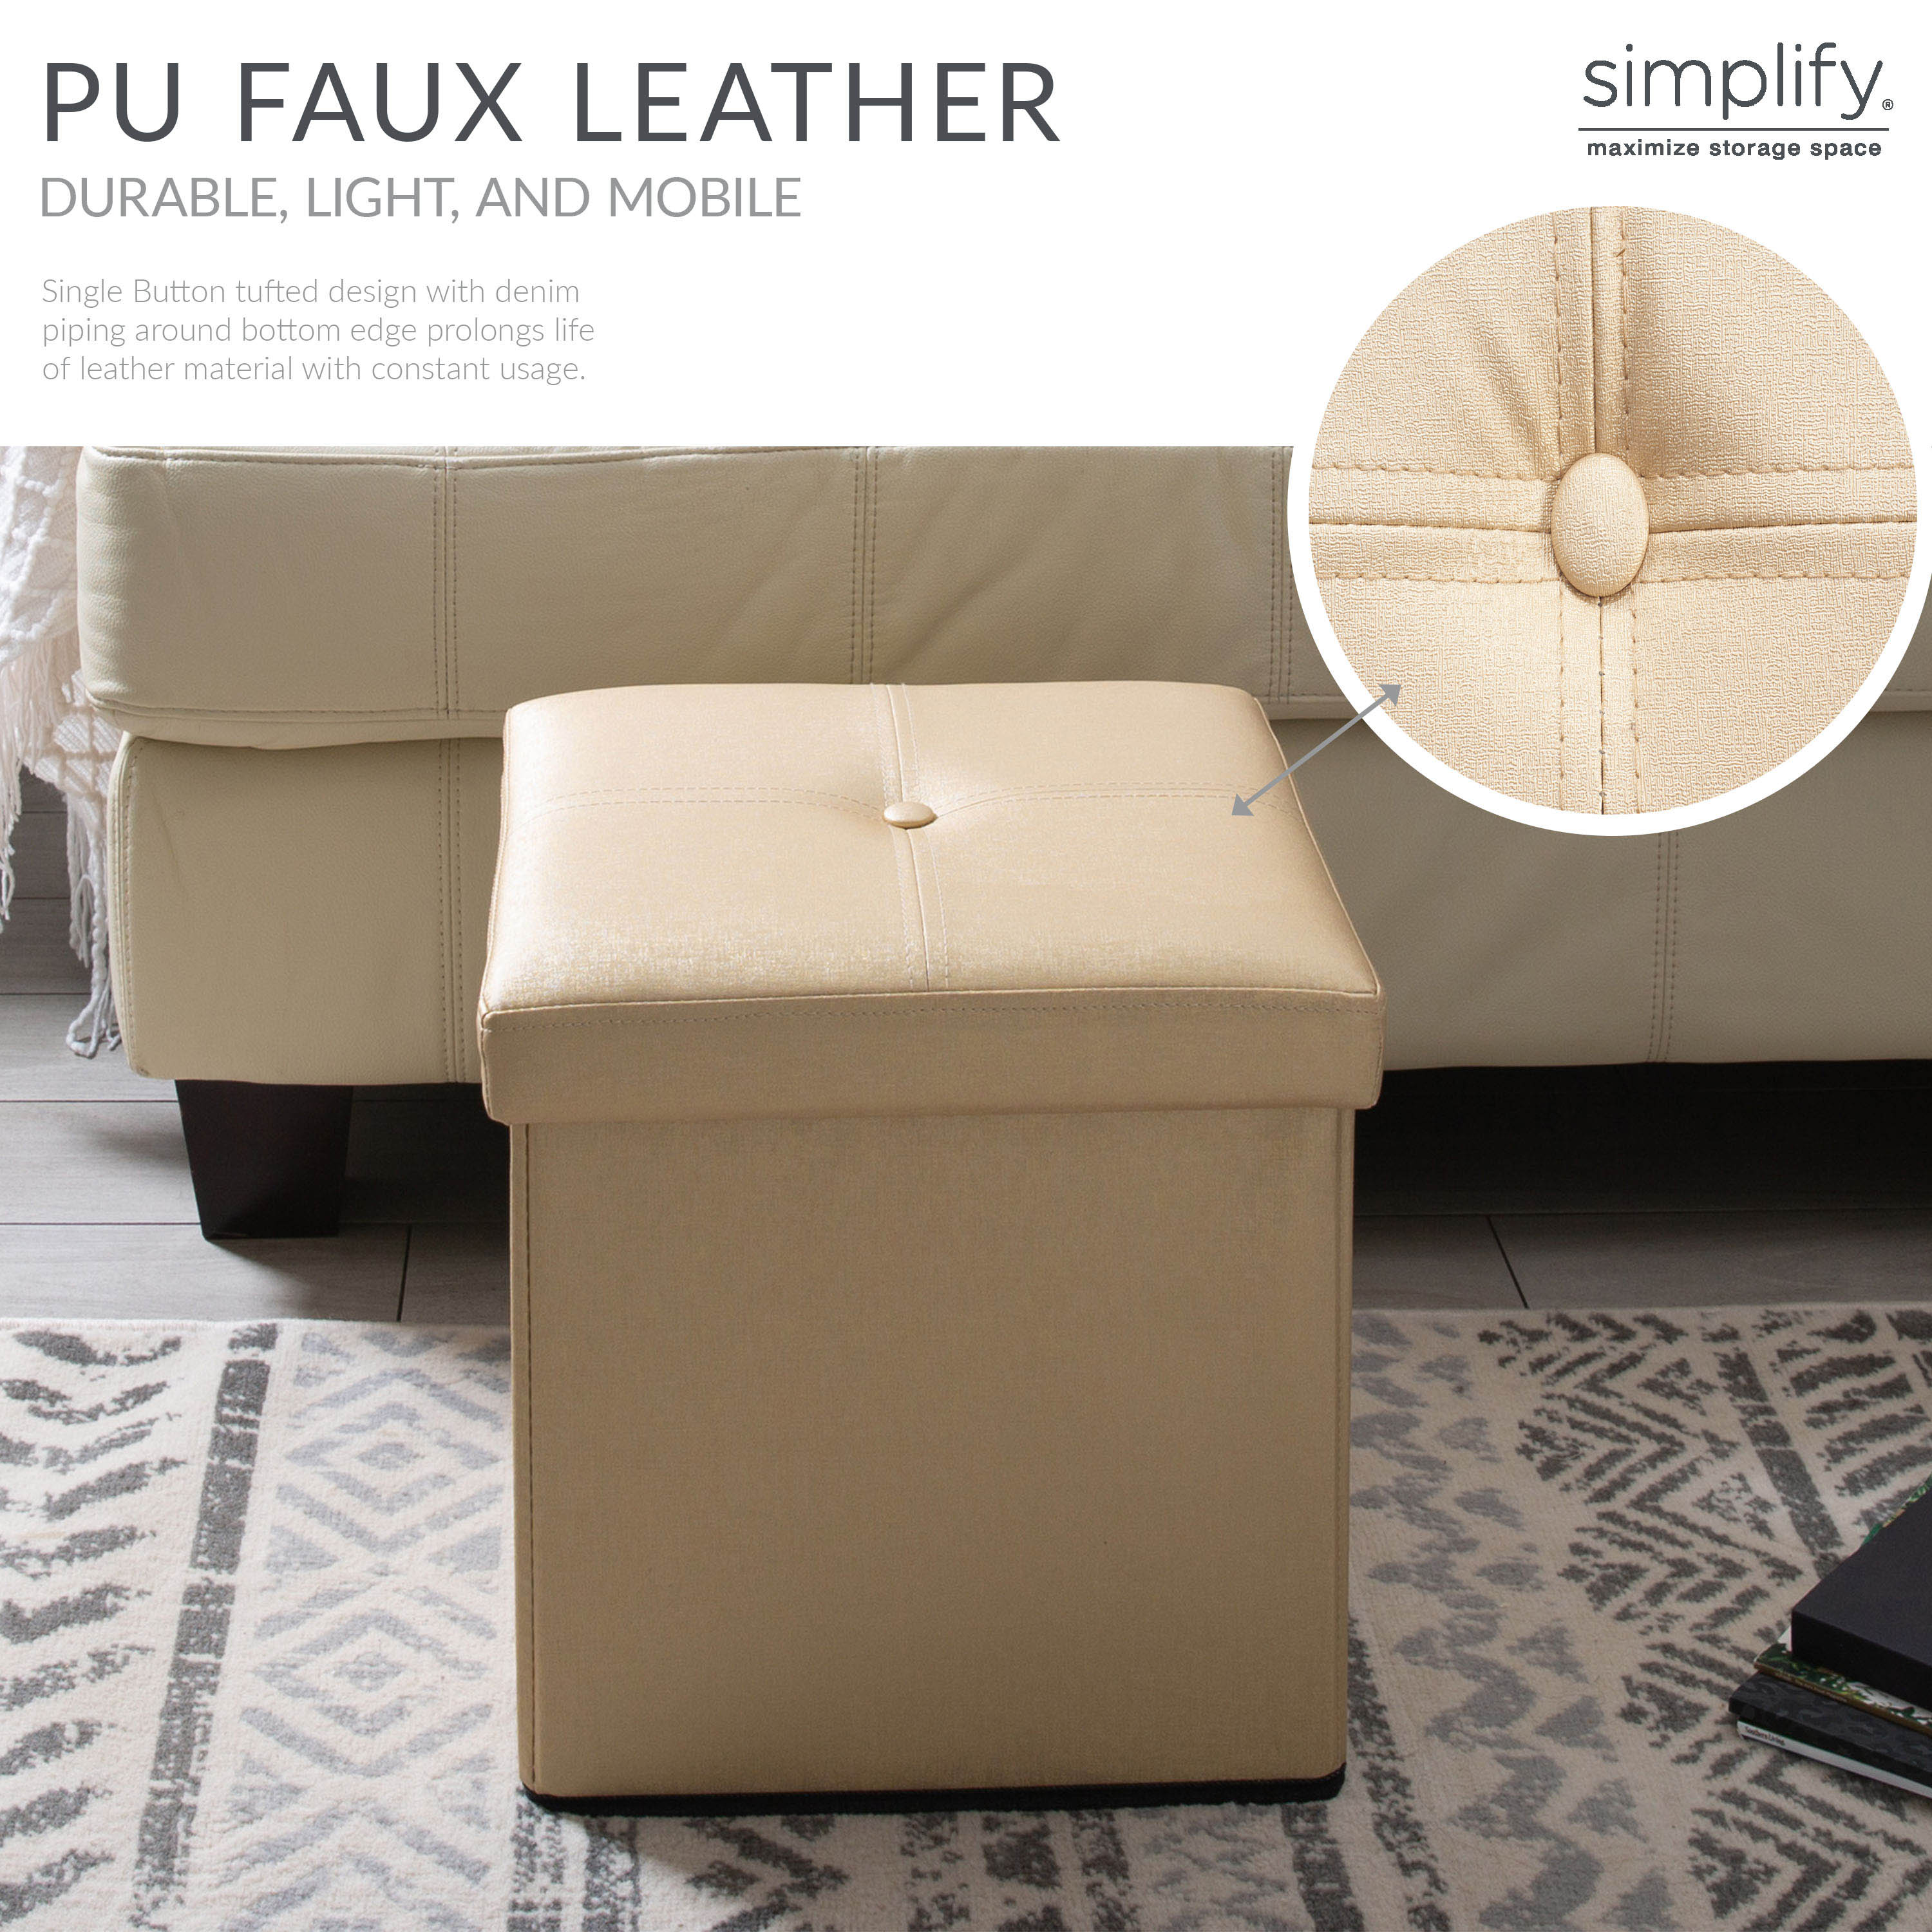 Simplify Faux Leather Folding Storage Ottoman Cube in Metallic Gold - image 3 of 10